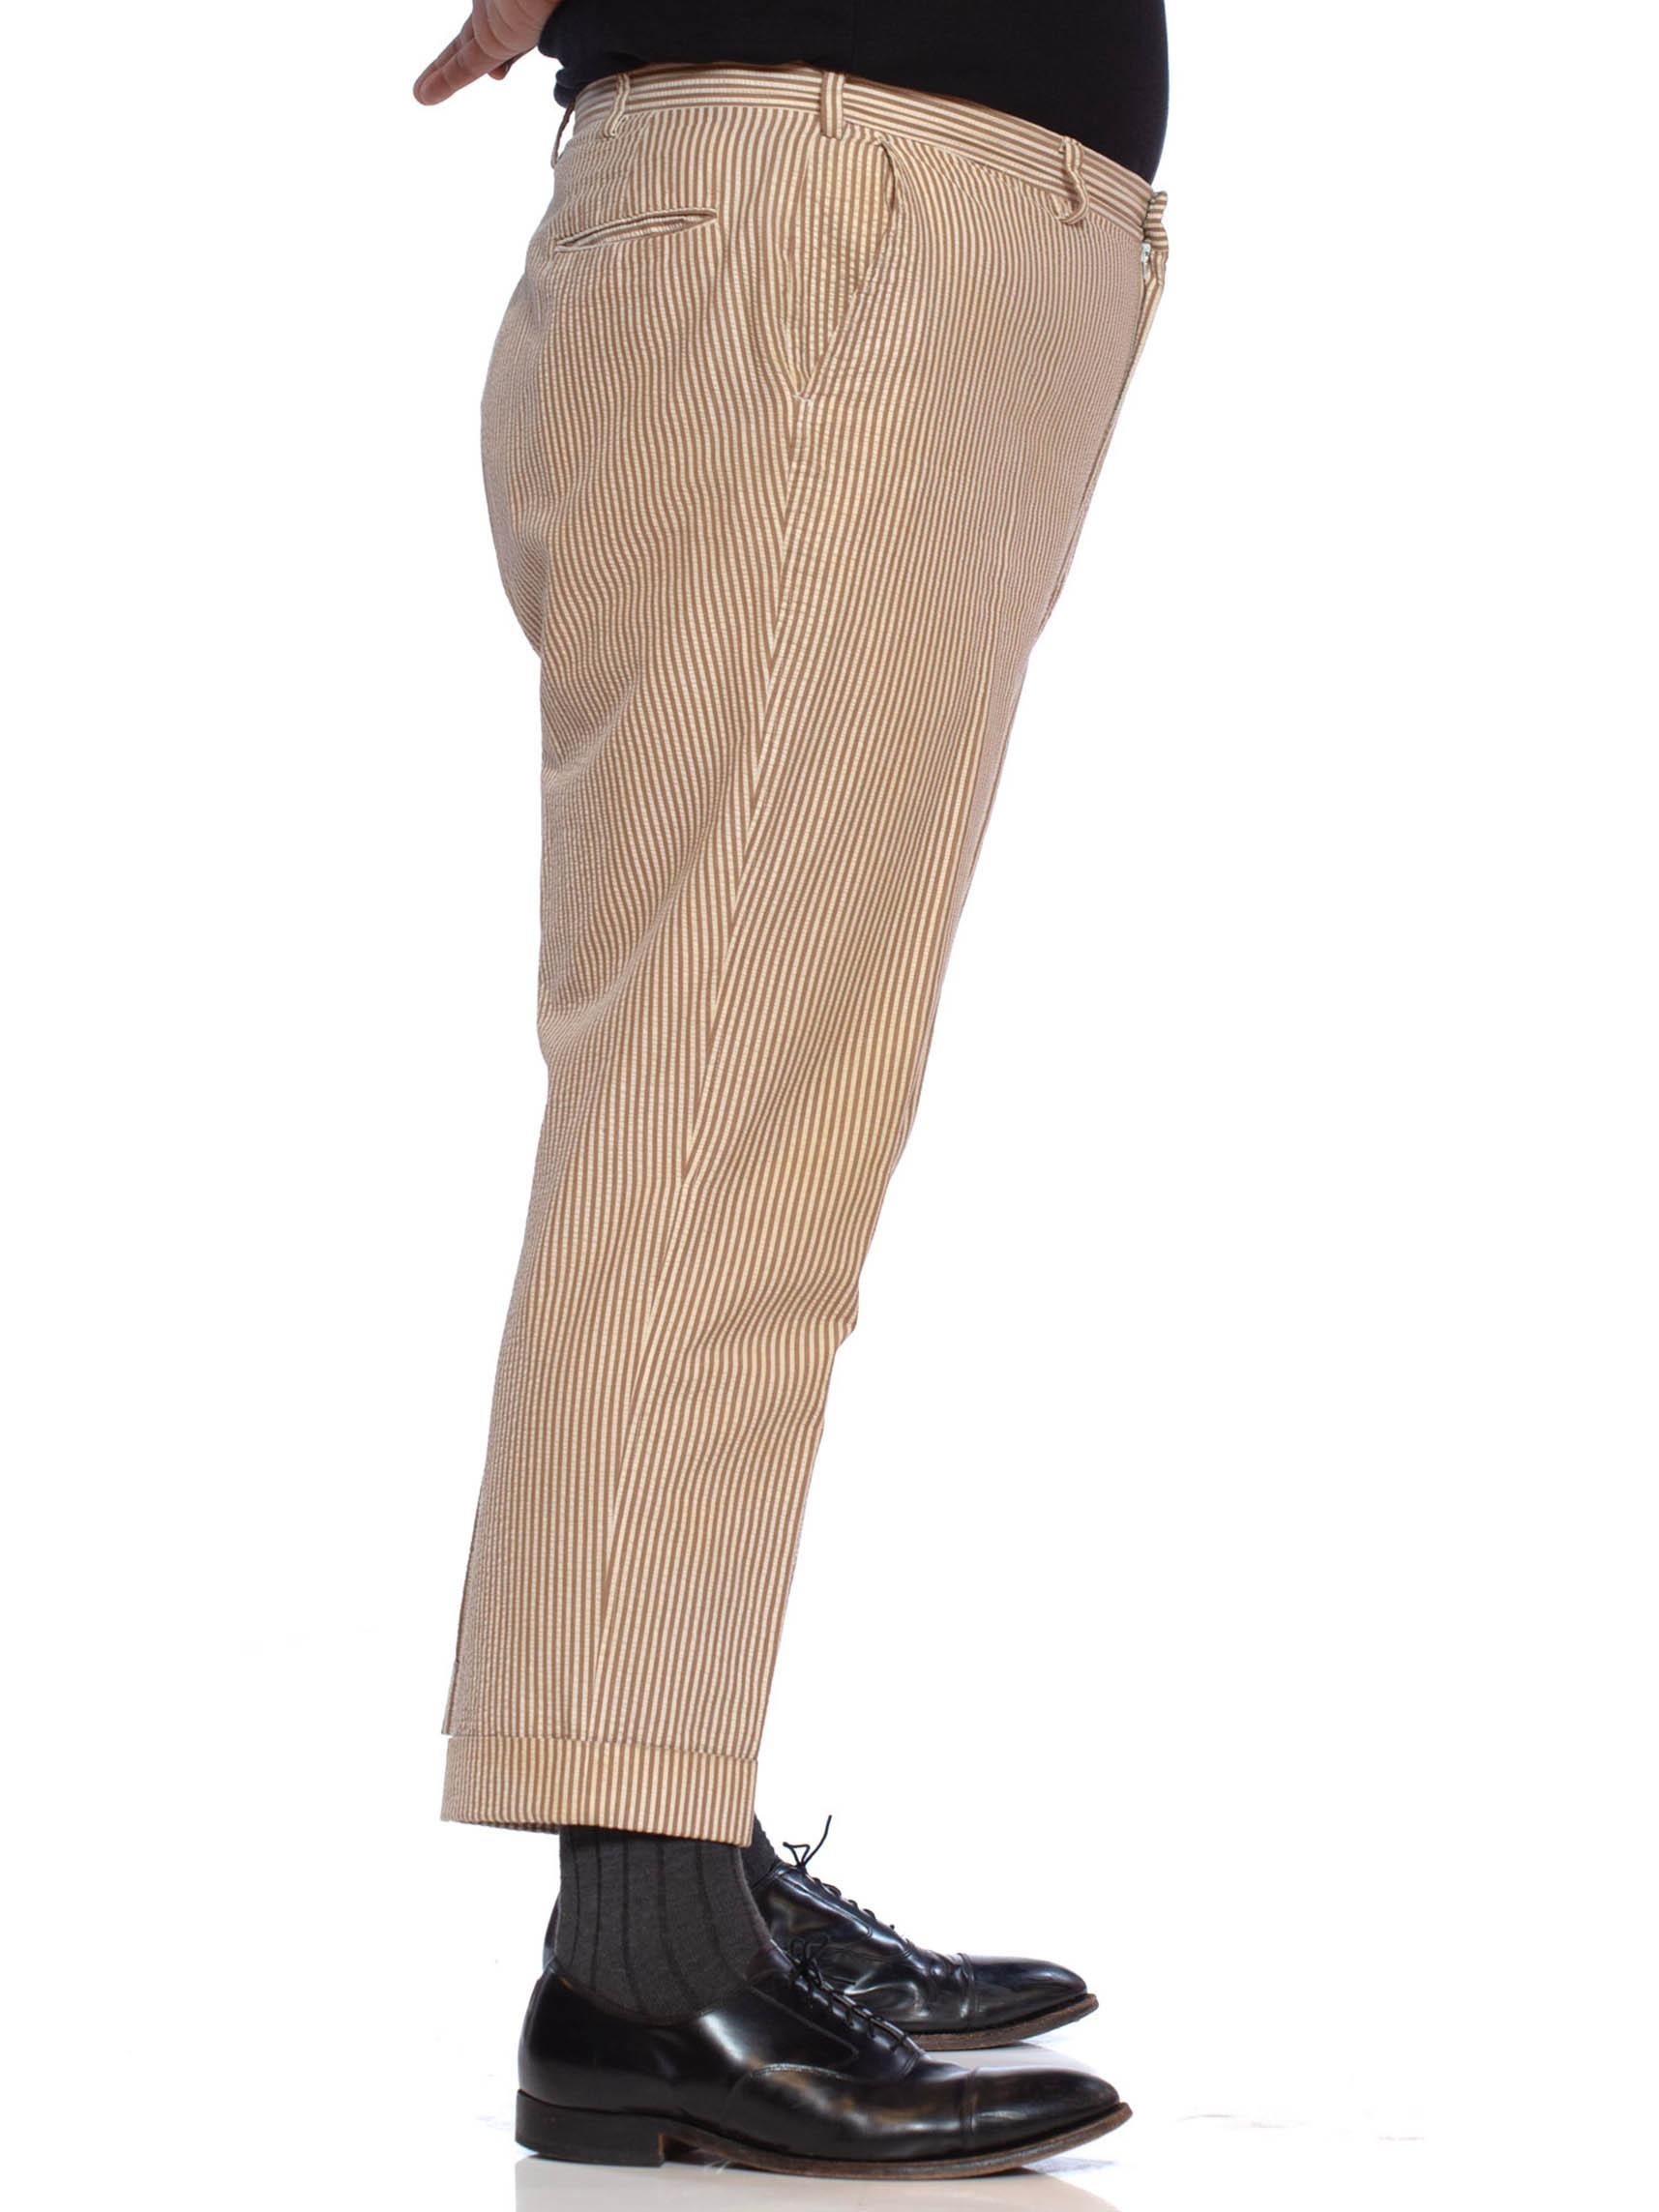 1970S BROOKS BROTHERS Brown & Beige Cotton Seersucker Men's Pants In Excellent Condition For Sale In New York, NY